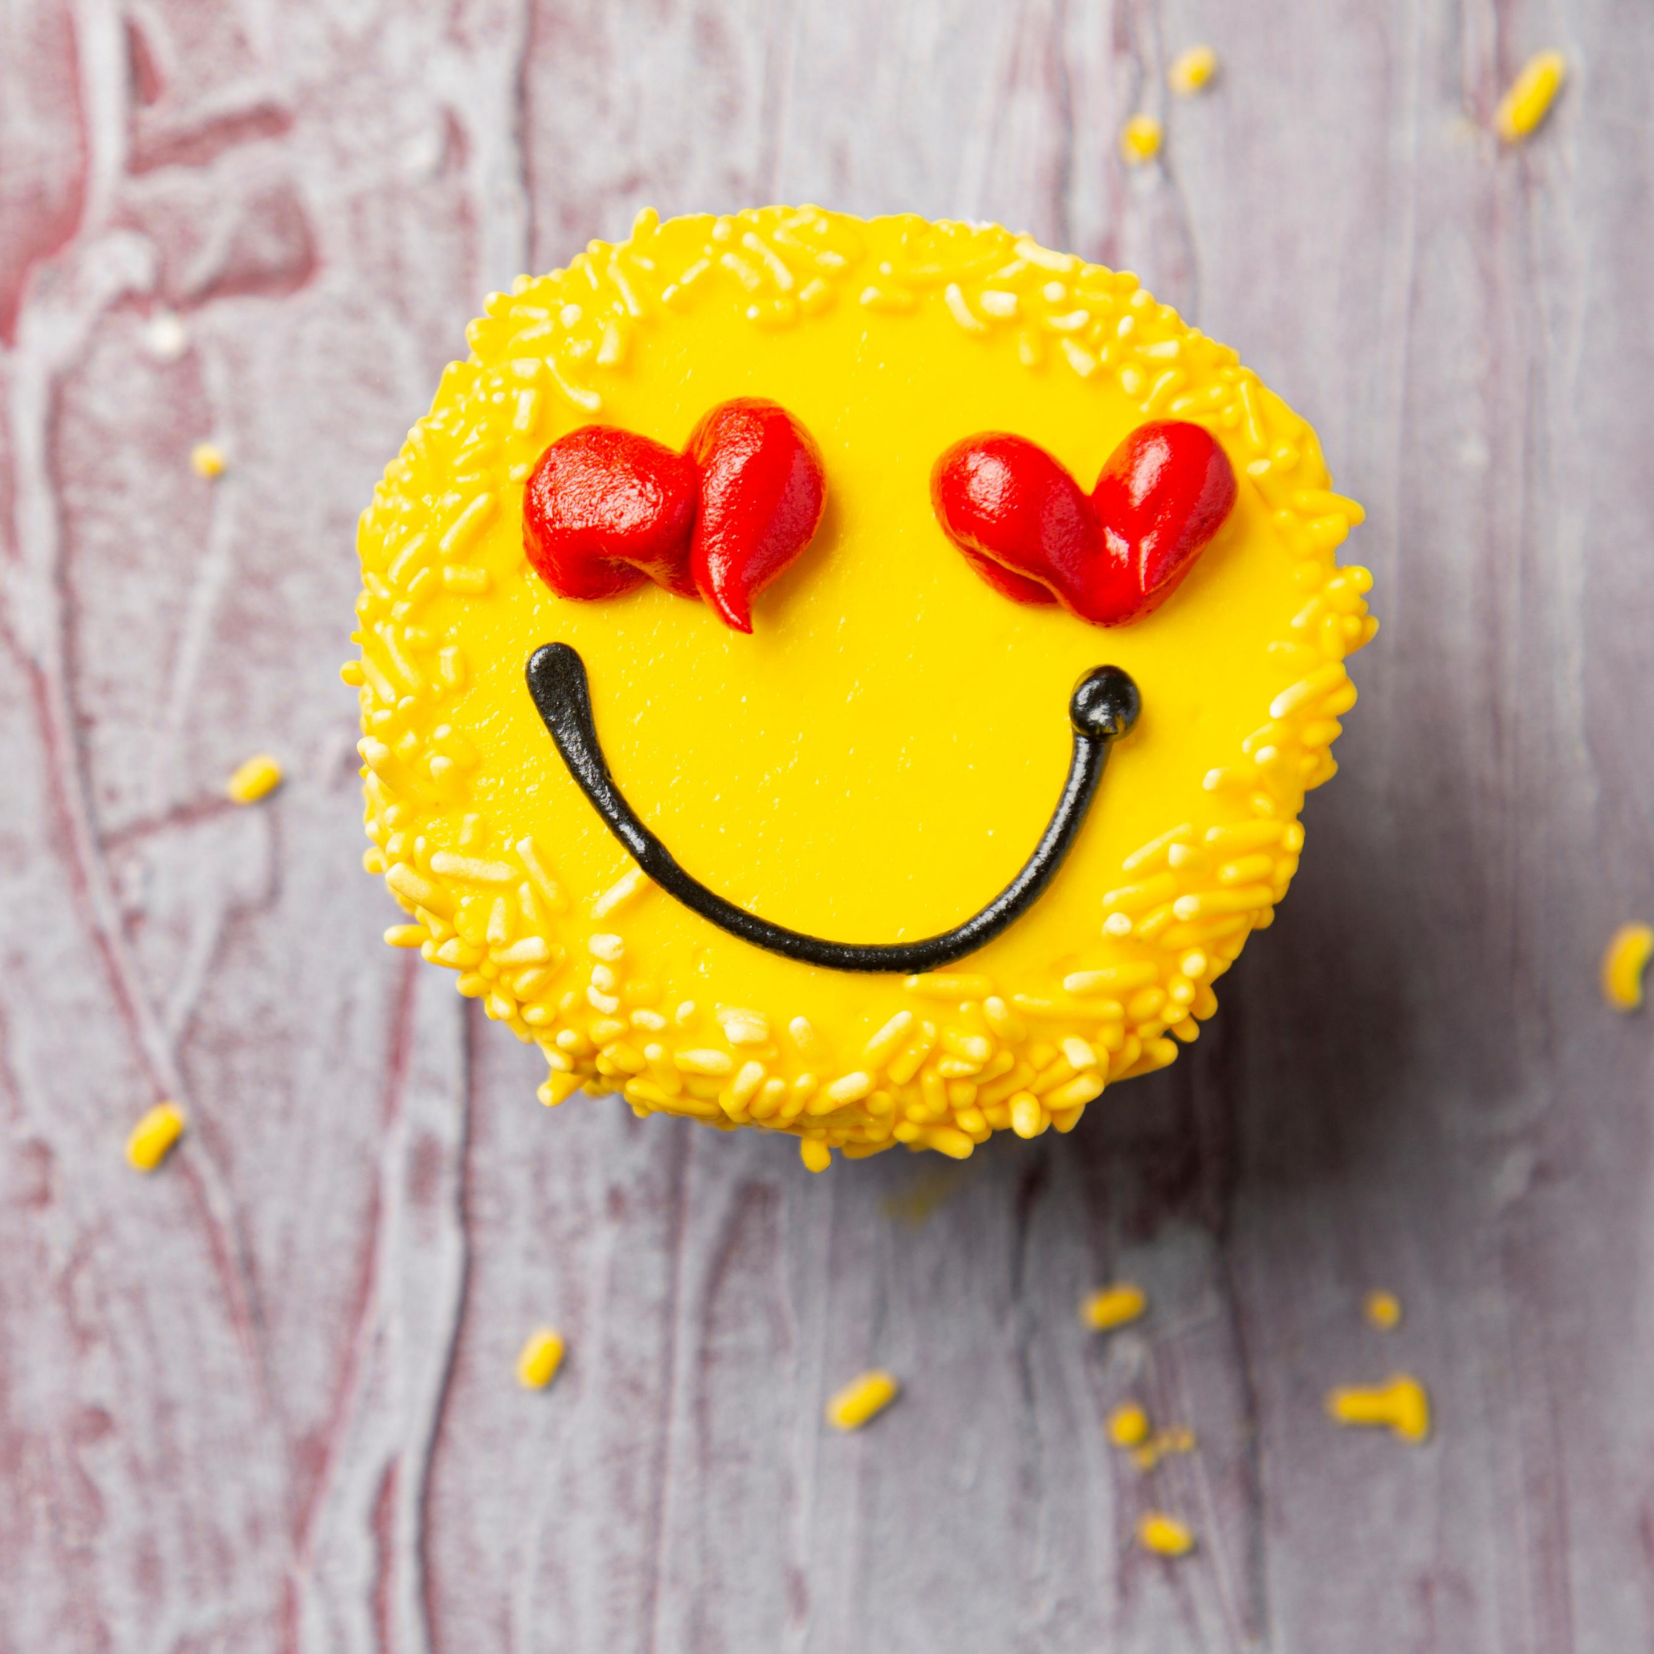 Yellow smile cupcake with red heart eyes depicting Nutrition Counseling